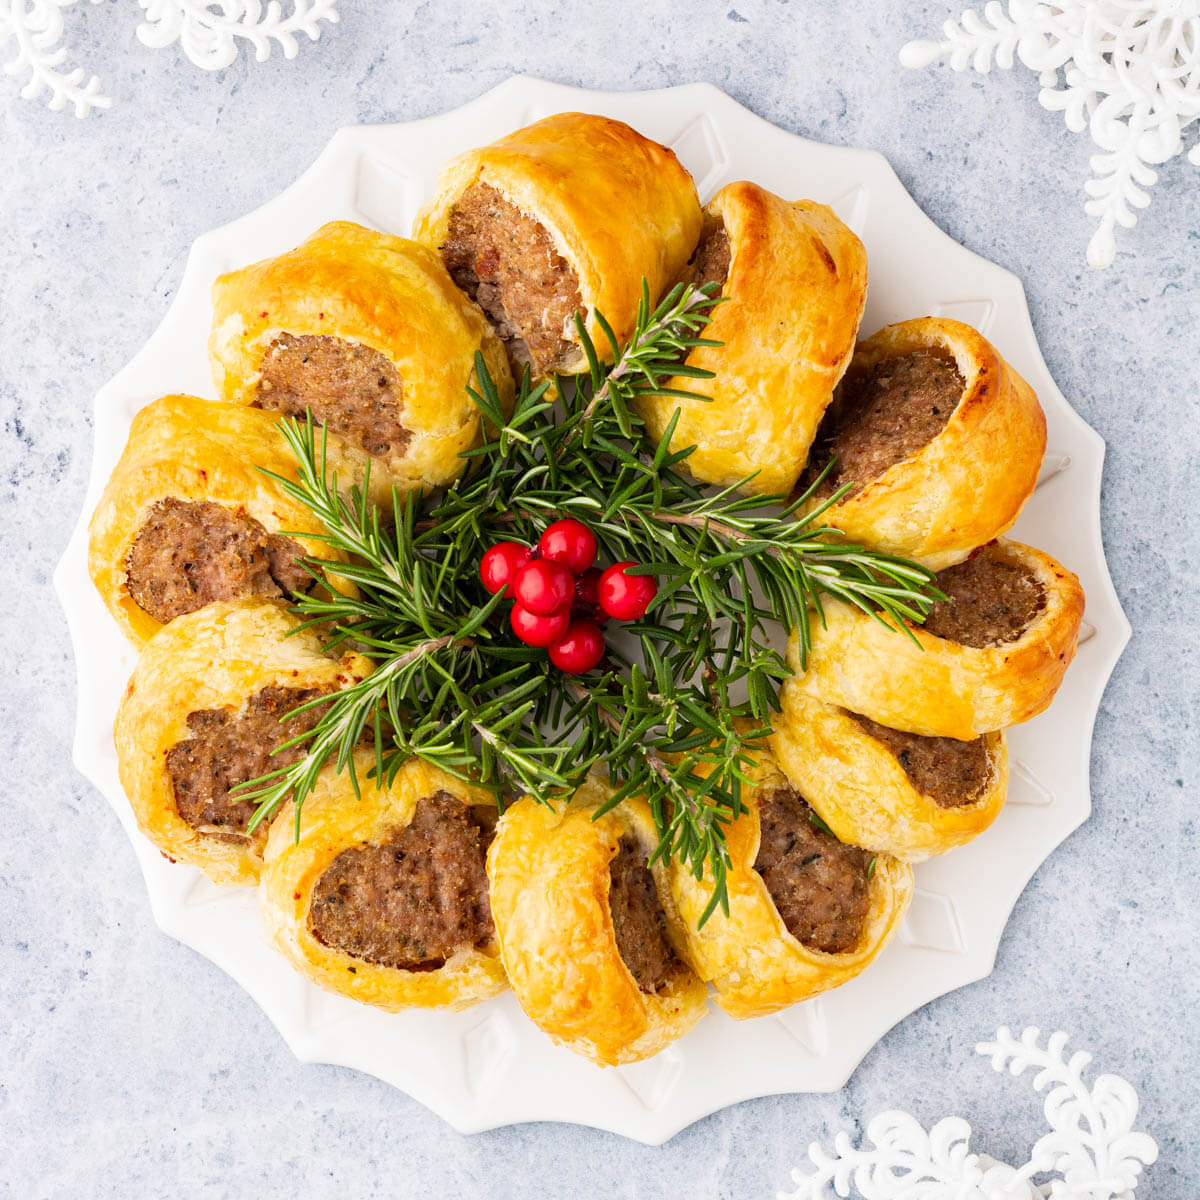 Golden baked Sausage Rolls in a wreath shape.